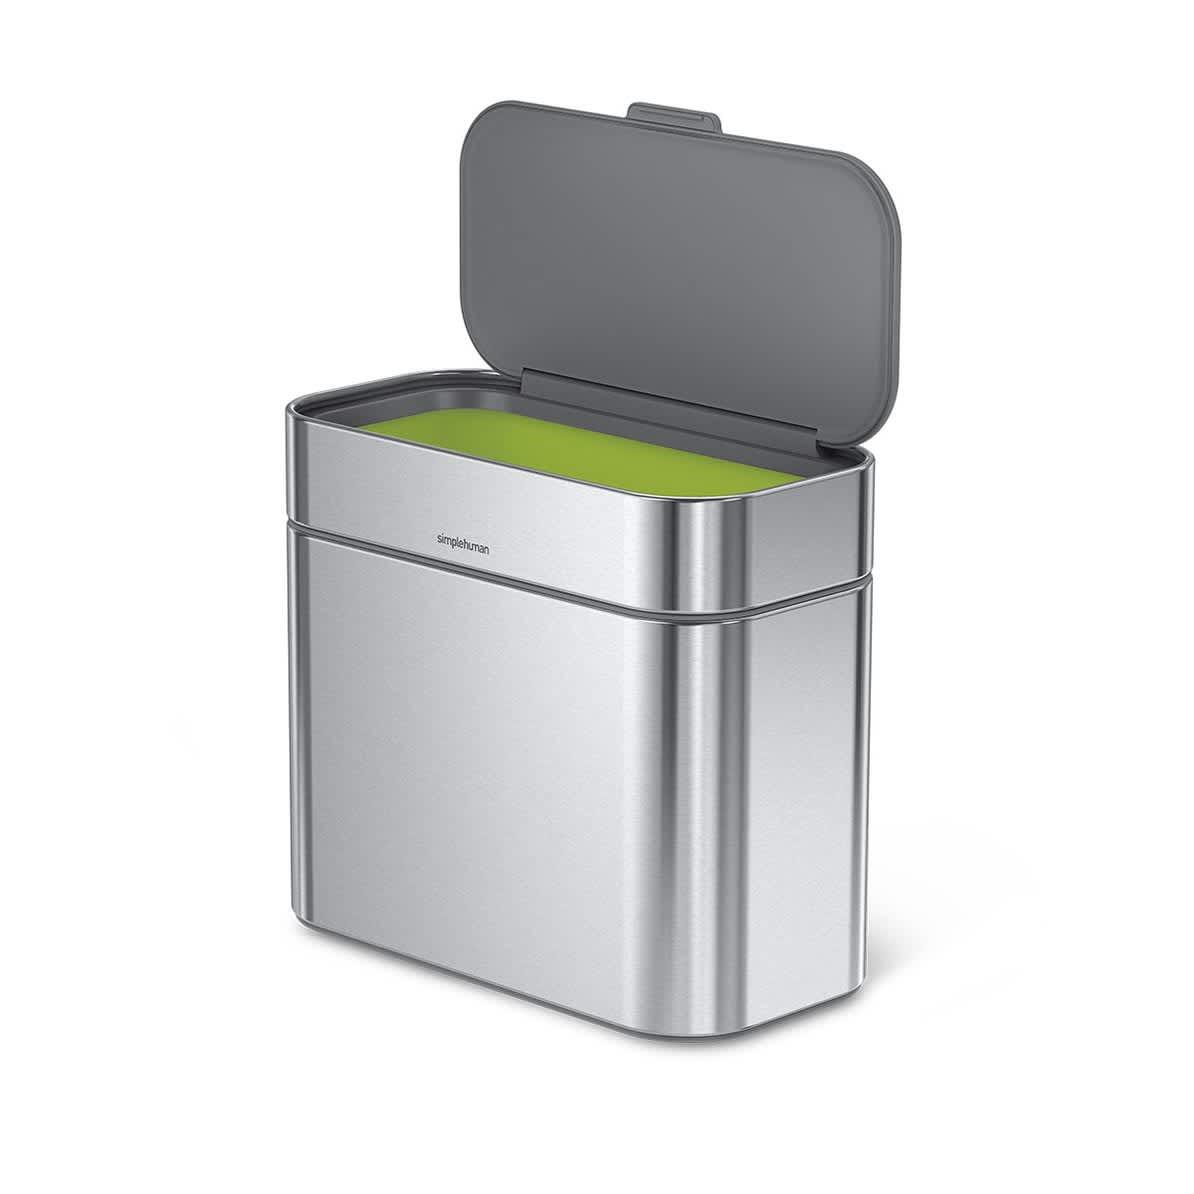 https://cdn.apartmenttherapy.info/image/upload/v1612197141/gen-workflow/product-database/simplehuman-compost-caddy.jpg